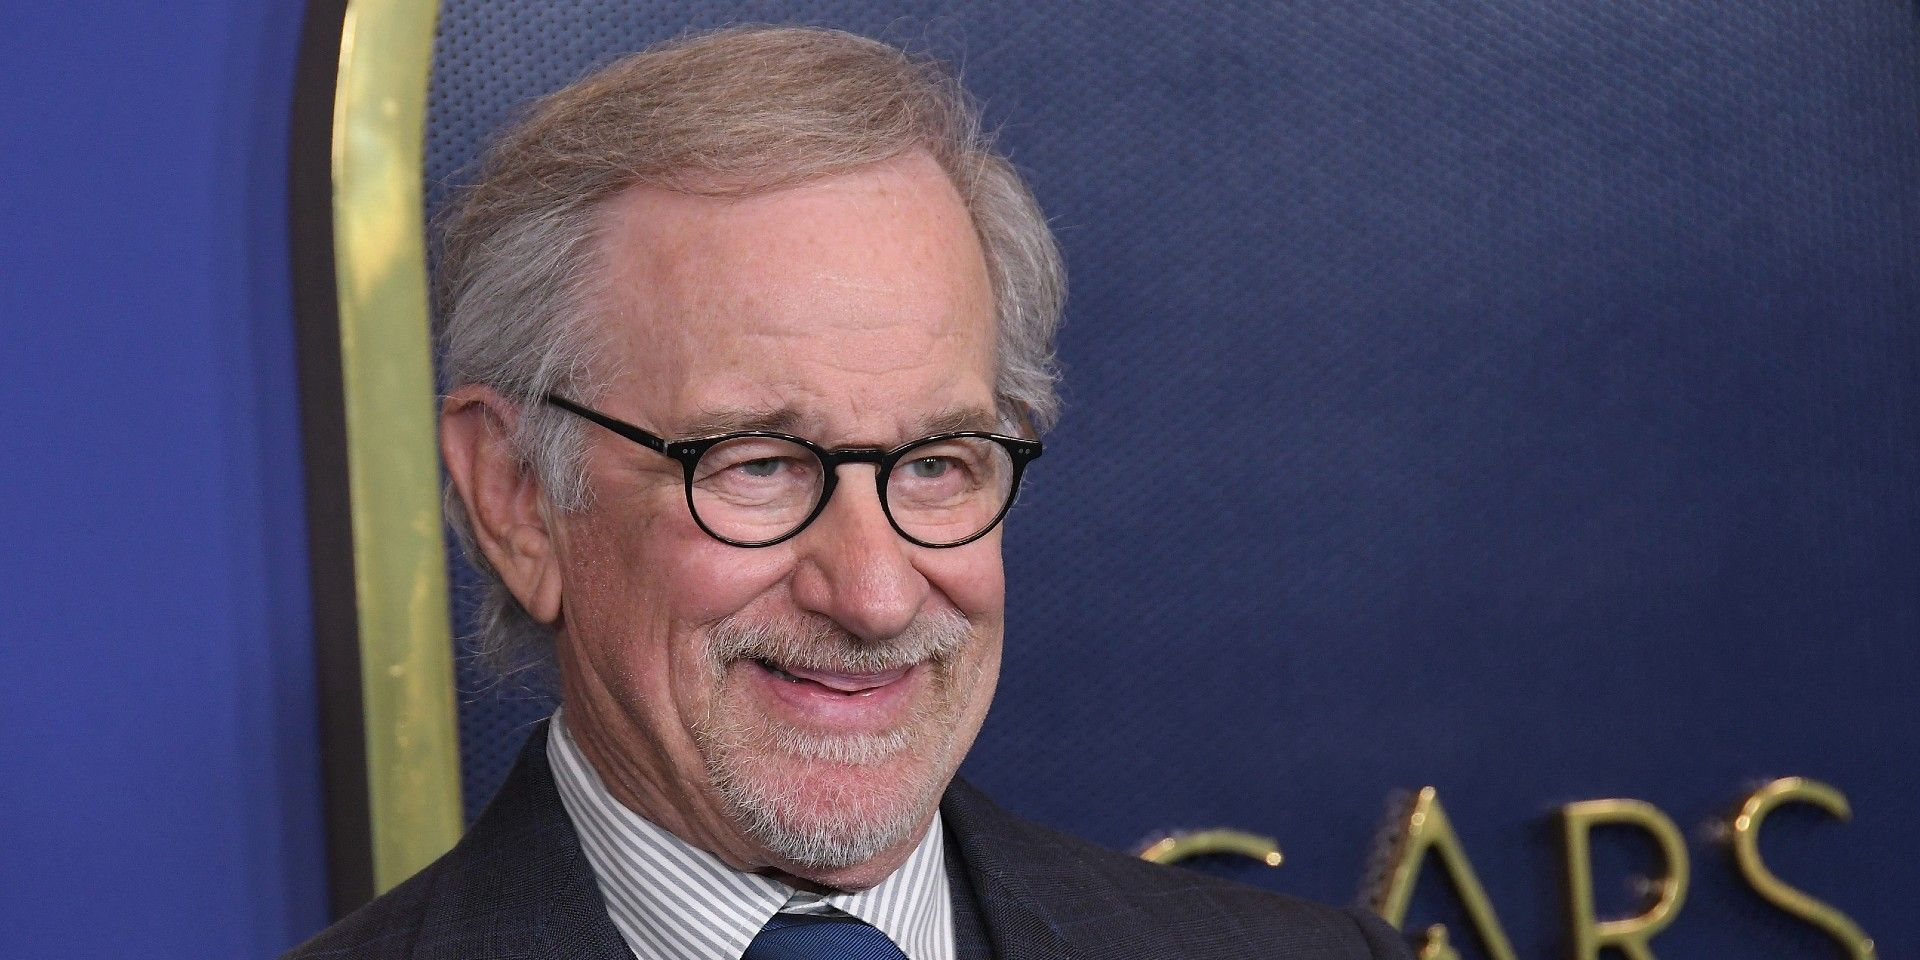 Steven Spielberg smiling at The Oscars